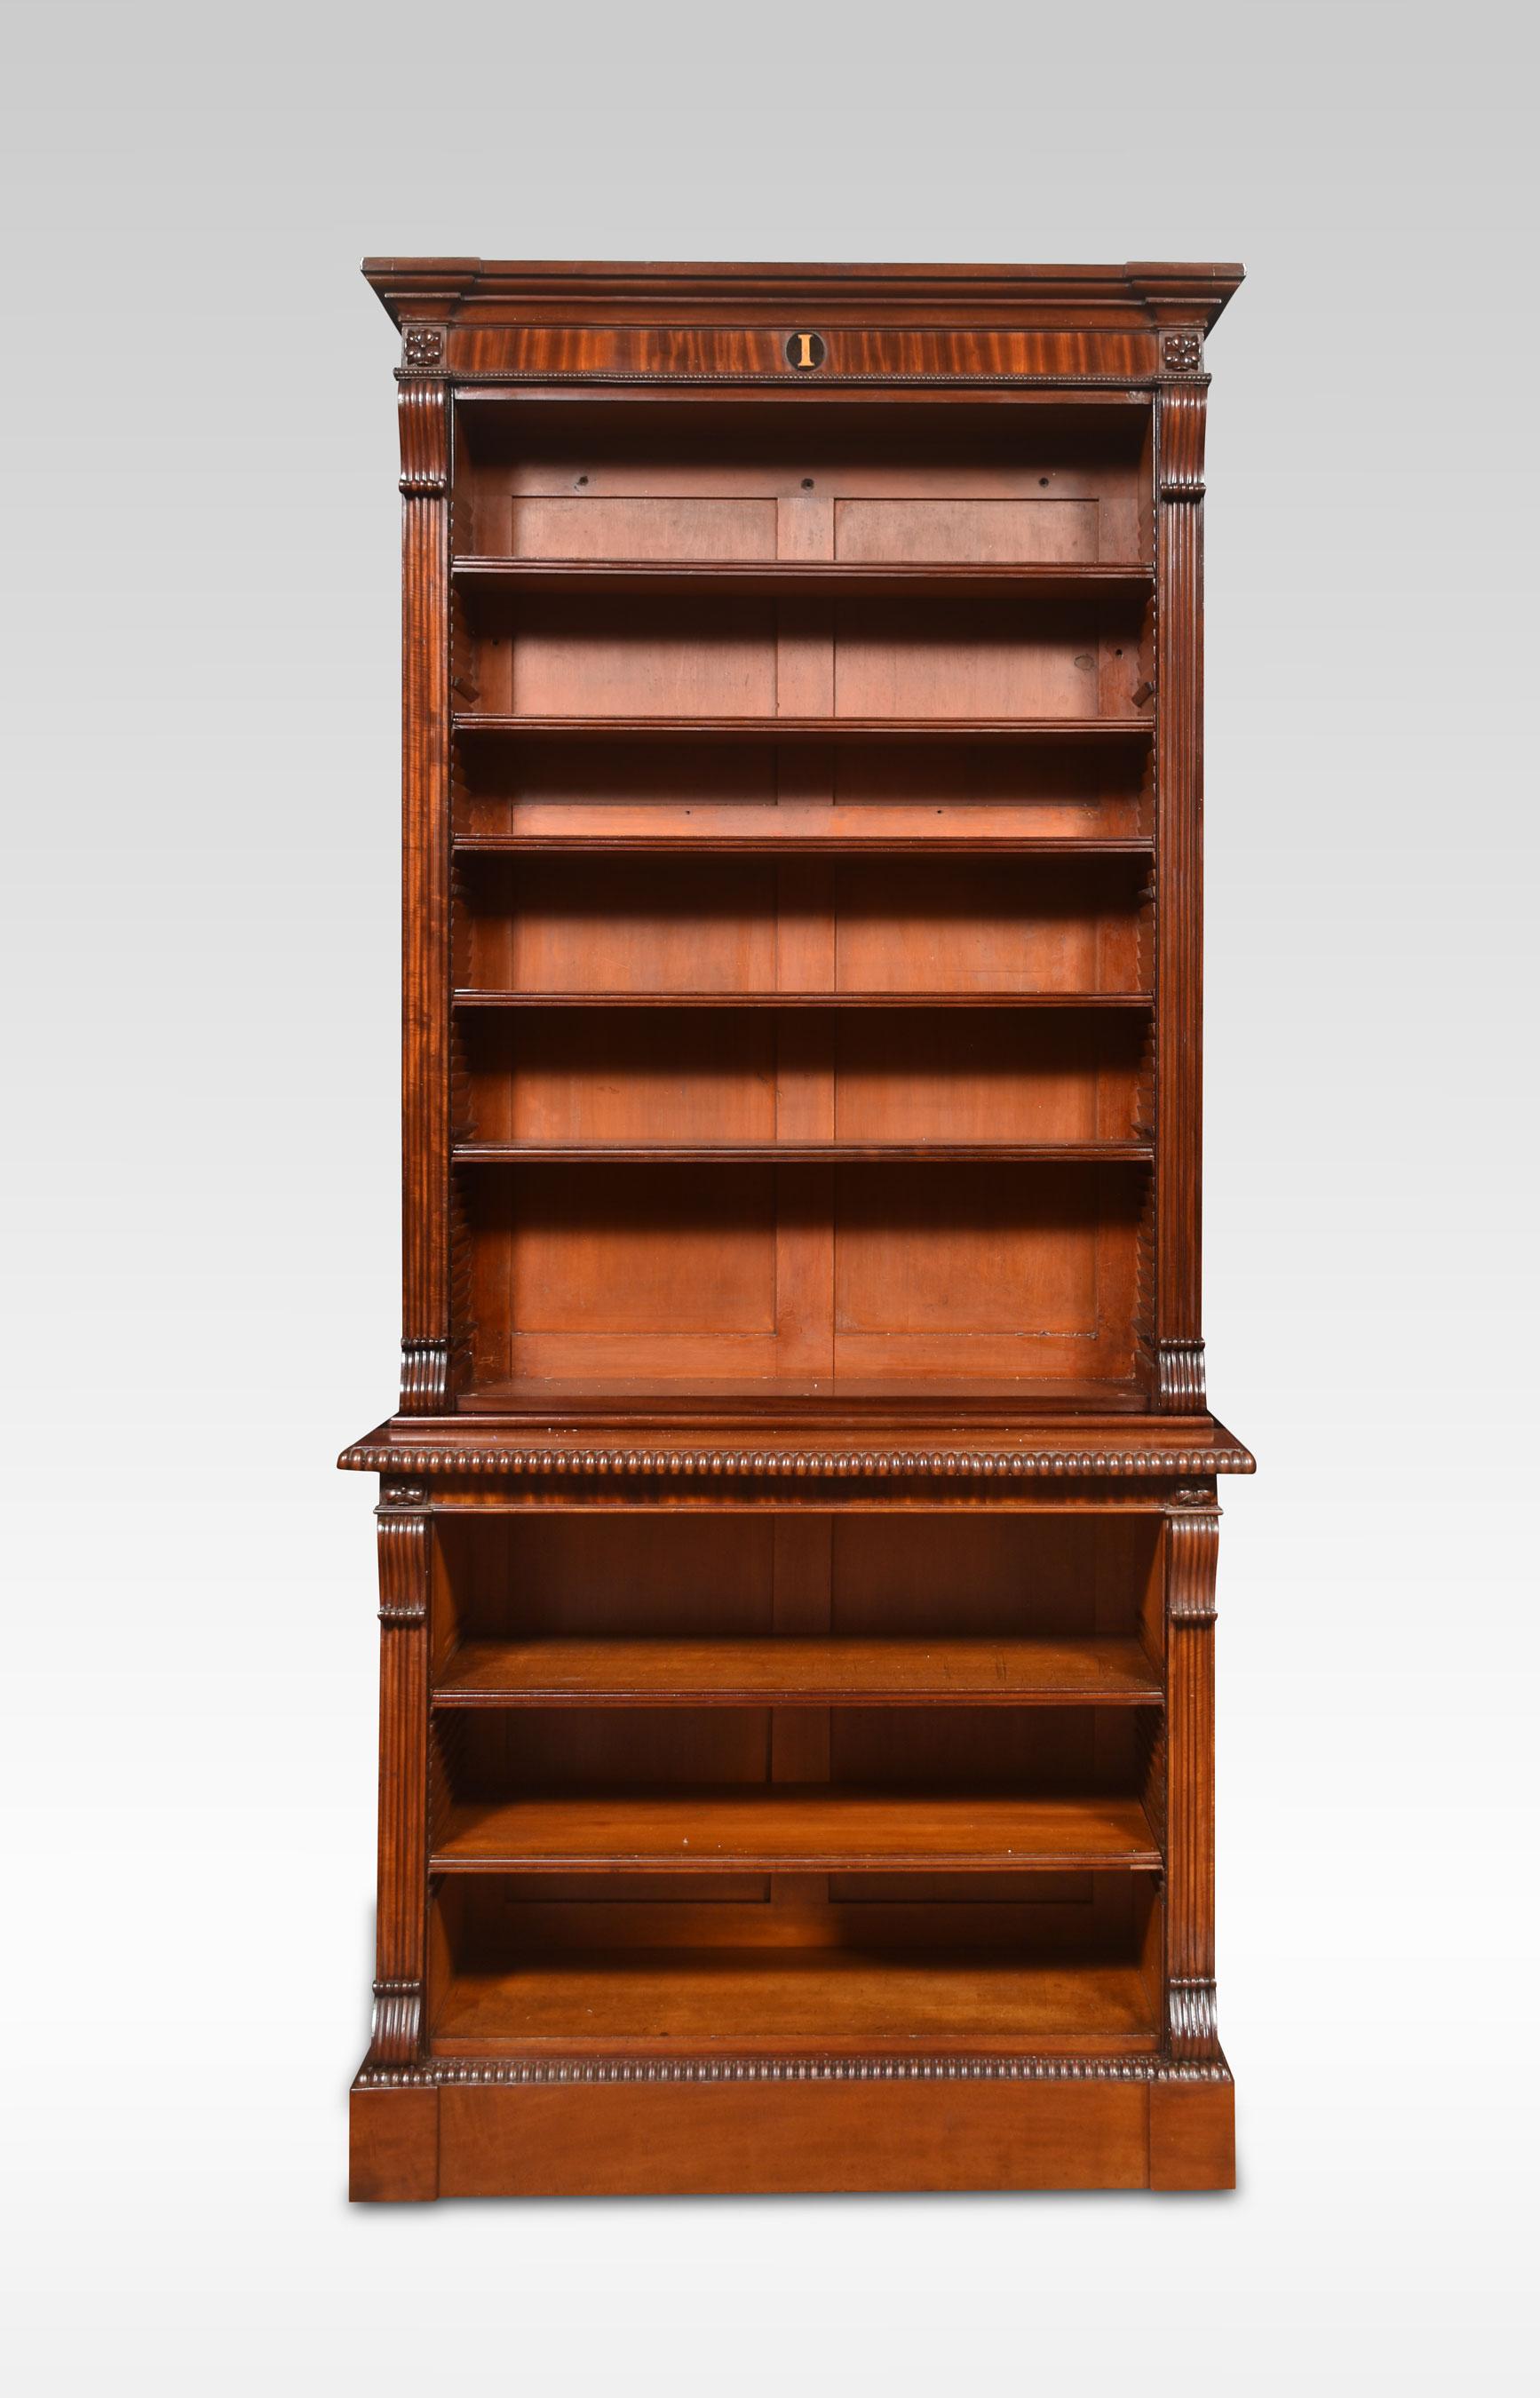 Large mahogany open bookcase, the carved moulded cornice with central ebony losange, above adjustable shelved interior. Flanked by carved reeded scrolling columns. All raised up on plinth base. The bookcase will separate into two sections for easy